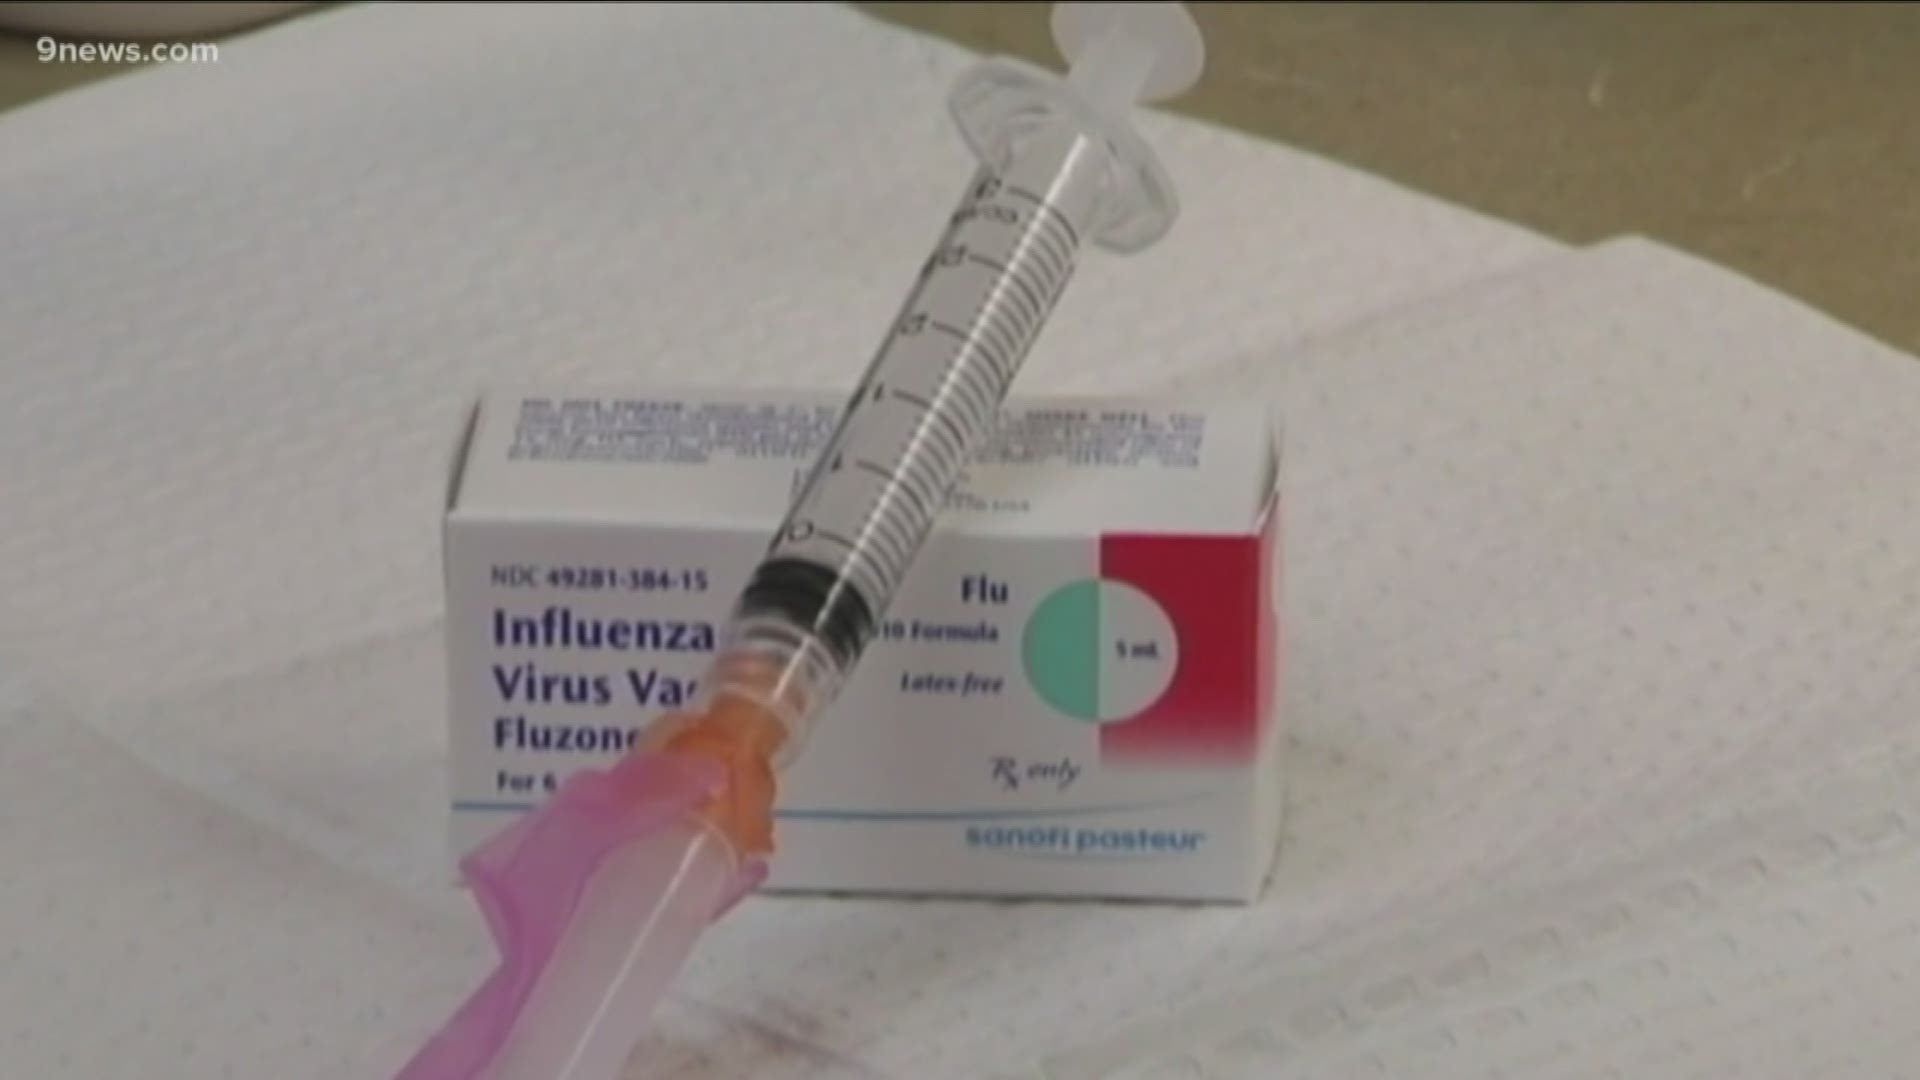 Winter flu season is starting at its earliest point in 15 years, according to the CDC.